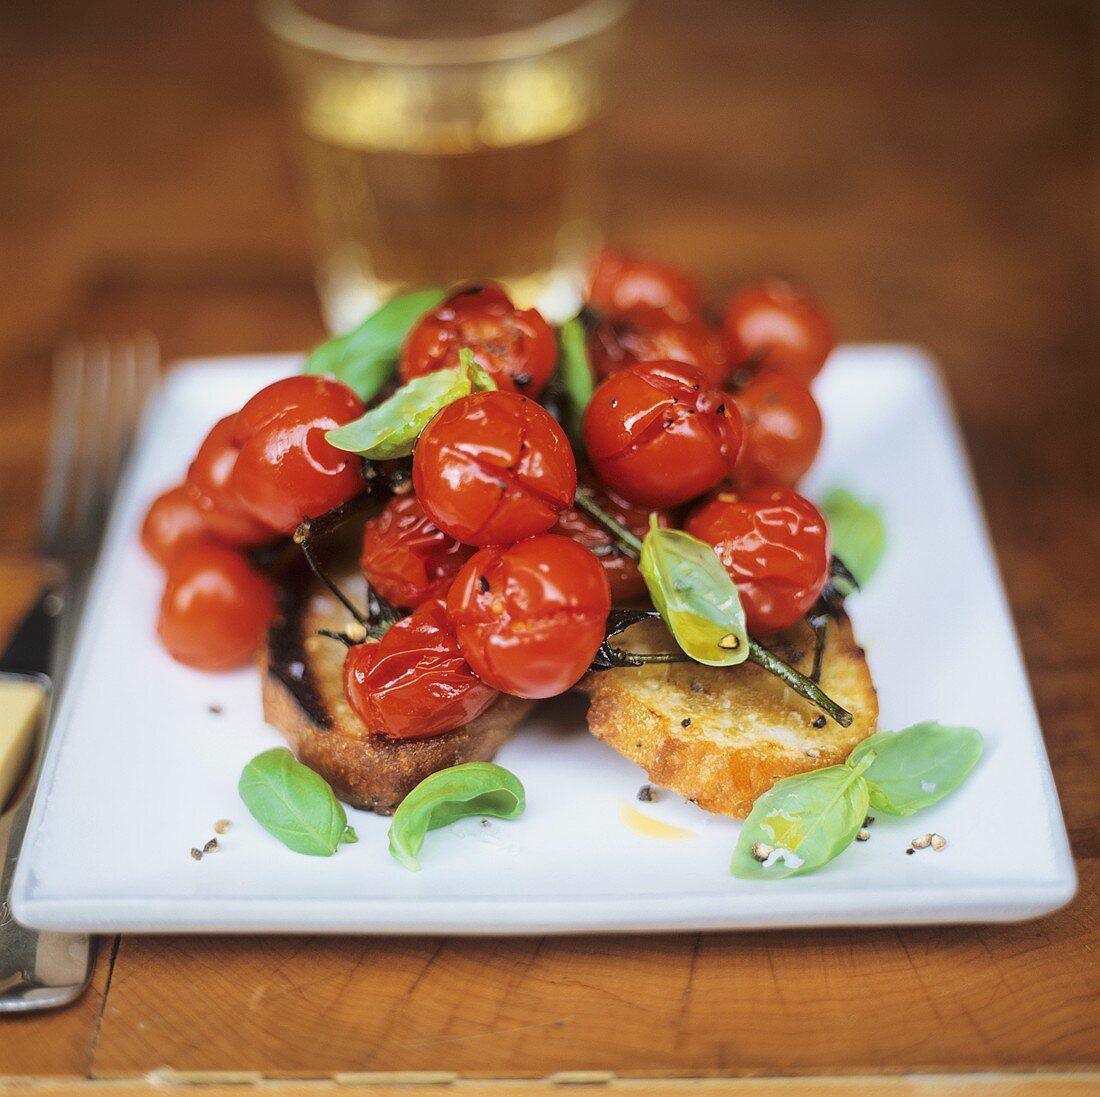 Garlic bread with baked cherry tomatoes